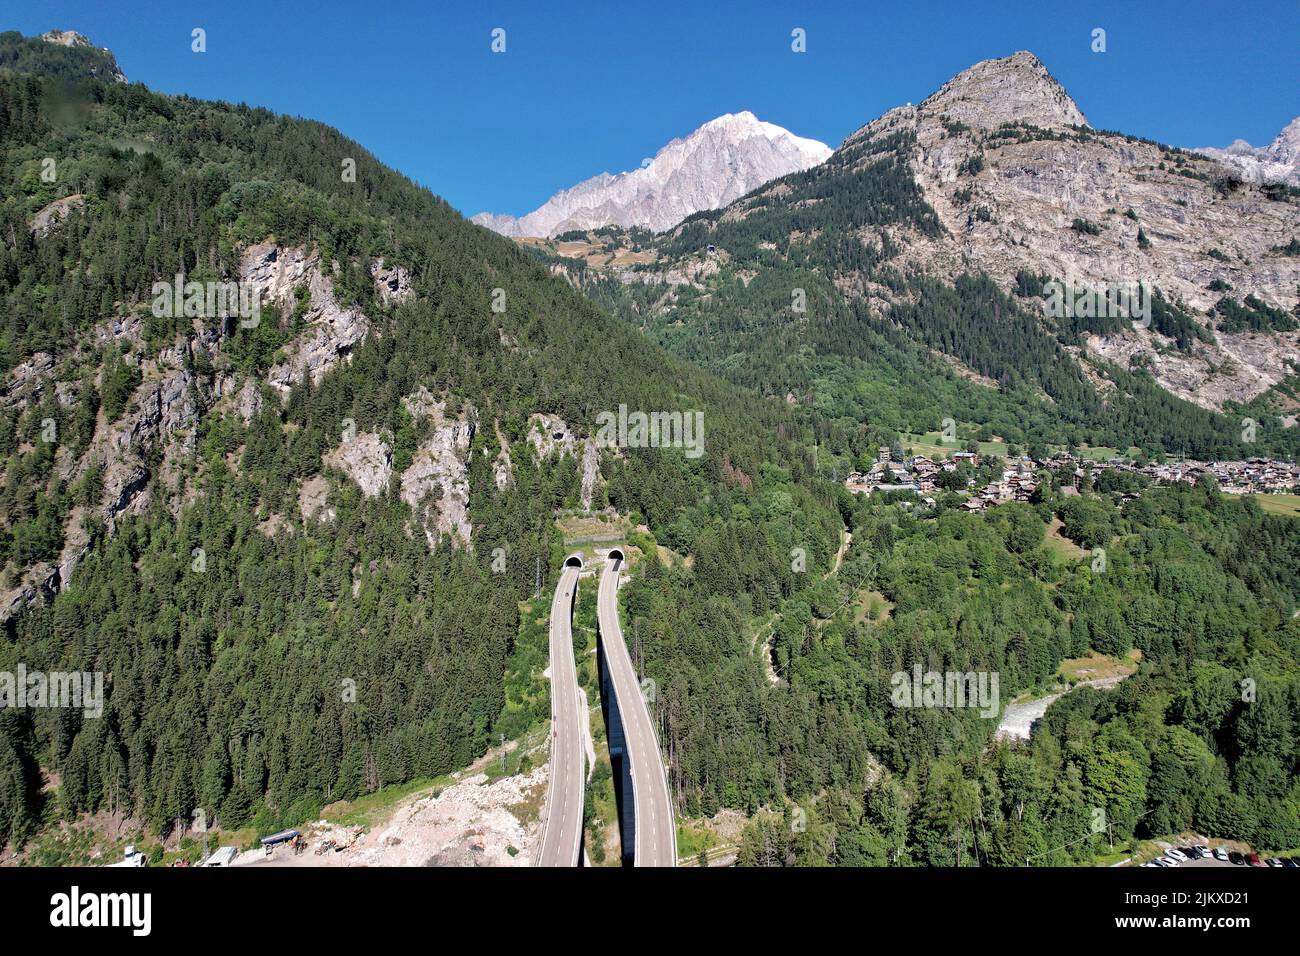 A5 freeway from Aosta to Mont Blanc. Italy. Stock Photo